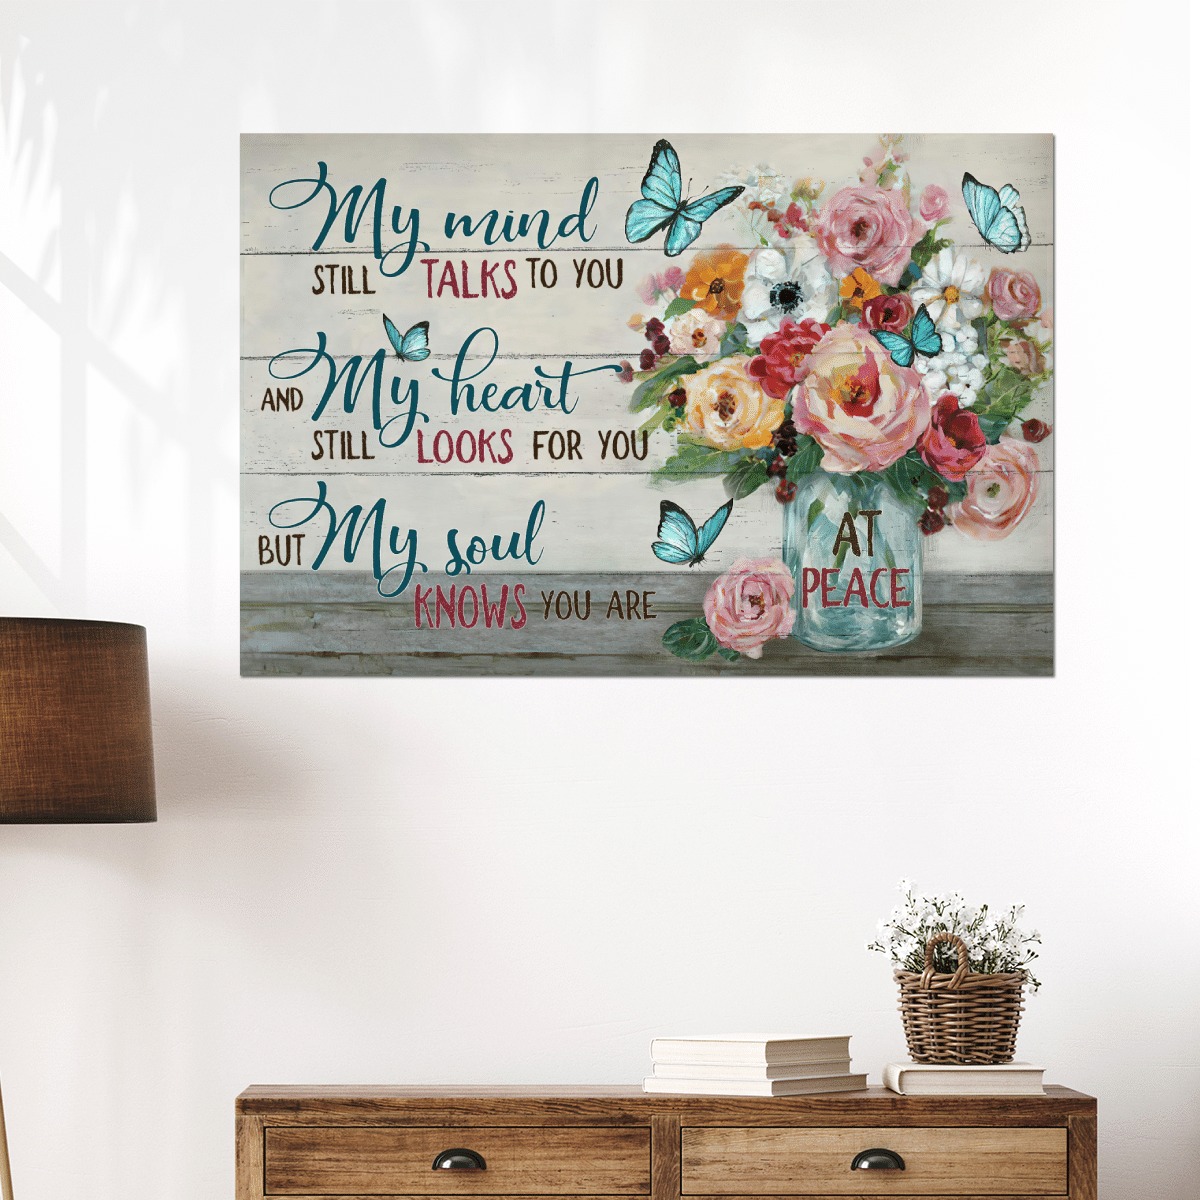 Jesus Flower vase My mind still talks to you at peace poster, canvas 4